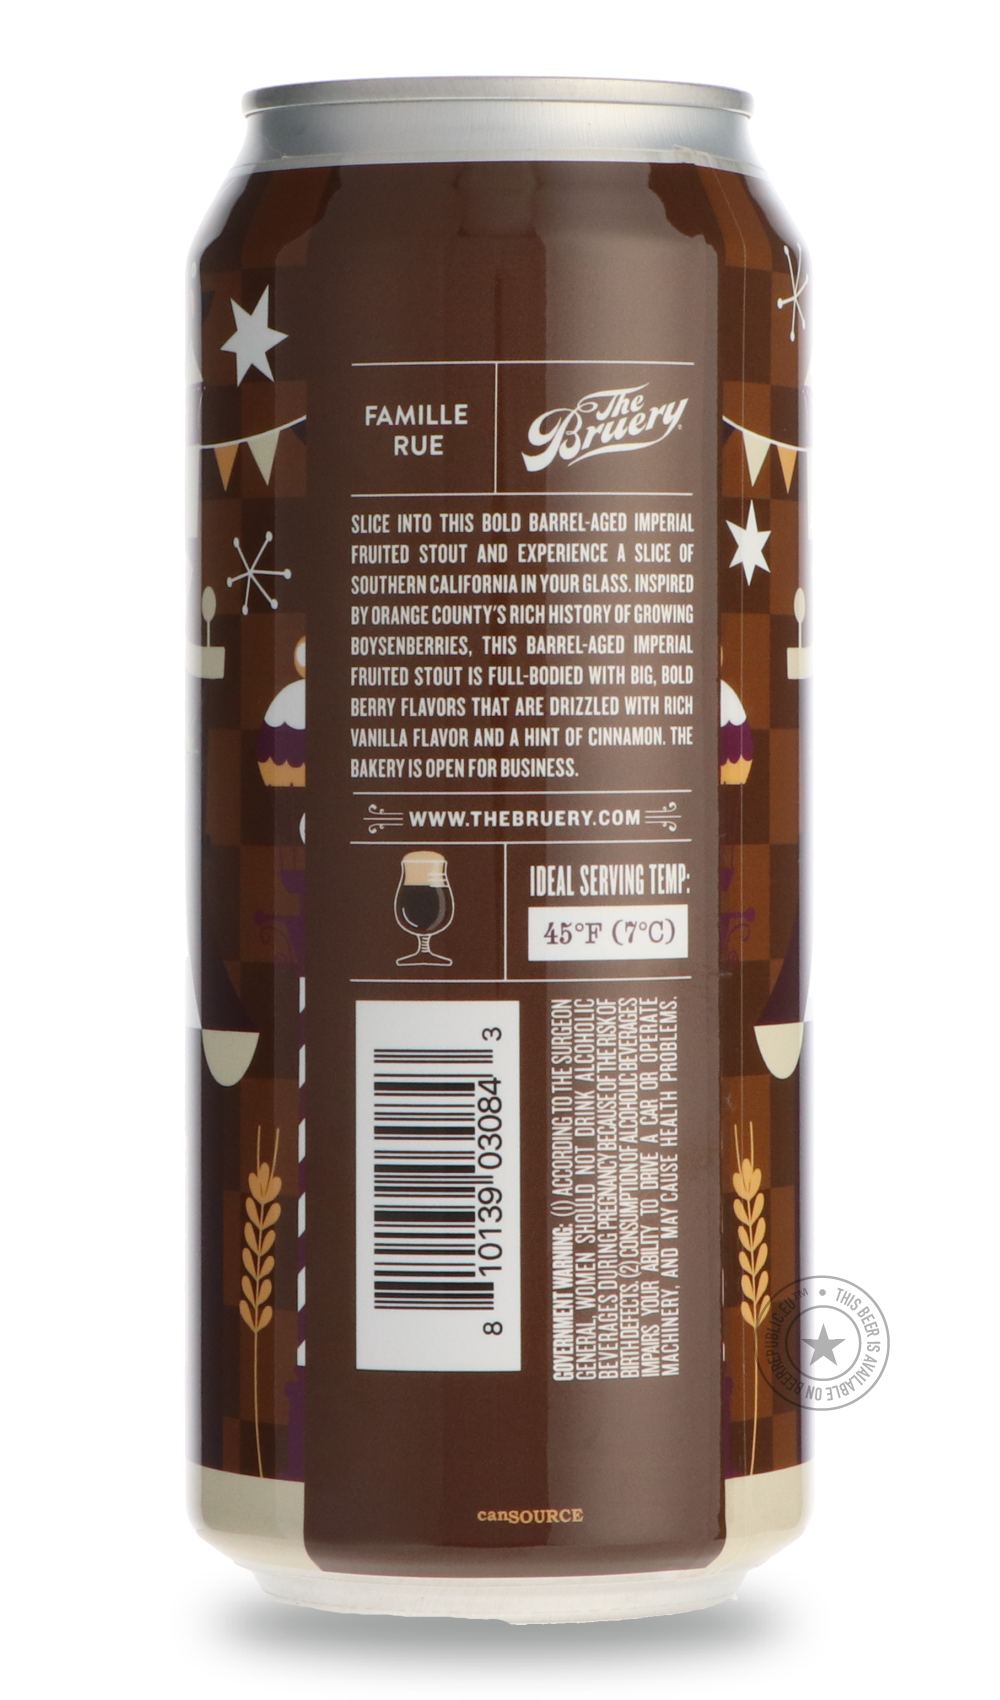 -The Bruery- Bakery: Boysenberry Pie (2021)-Stout & Porter- Only @ Beer Republic - The best online beer store for American & Canadian craft beer - Buy beer online from the USA and Canada - Bier online kopen - Amerikaans bier kopen - Craft beer store - Craft beer kopen - Amerikanisch bier kaufen - Bier online kaufen - Acheter biere online - IPA - Stout - Porter - New England IPA - Hazy IPA - Imperial Stout - Barrel Aged - Barrel Aged Imperial Stout - Brown - Dark beer - Blond - Blonde - Pilsner - Lager - Whe